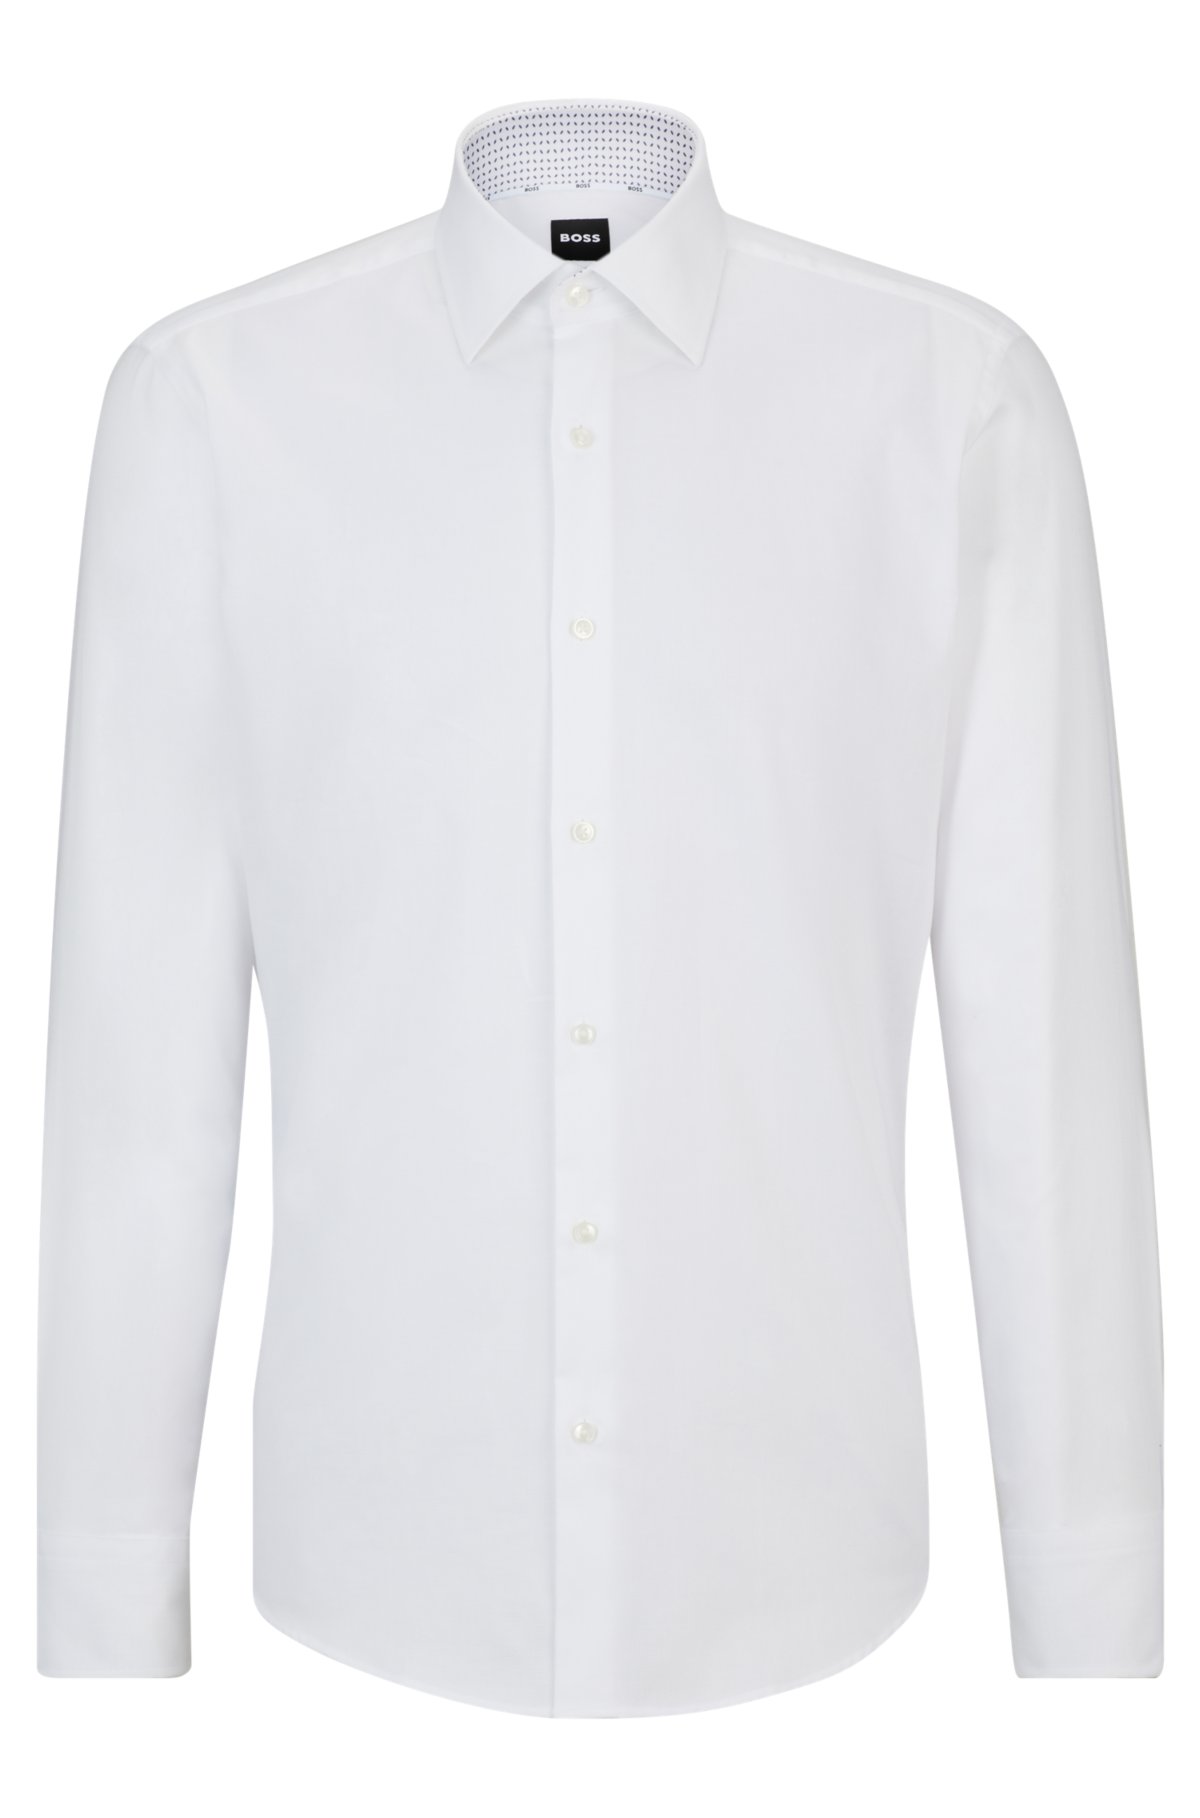 BOSS - Regular-fit shirt in easy-iron Oxford stretch cotton